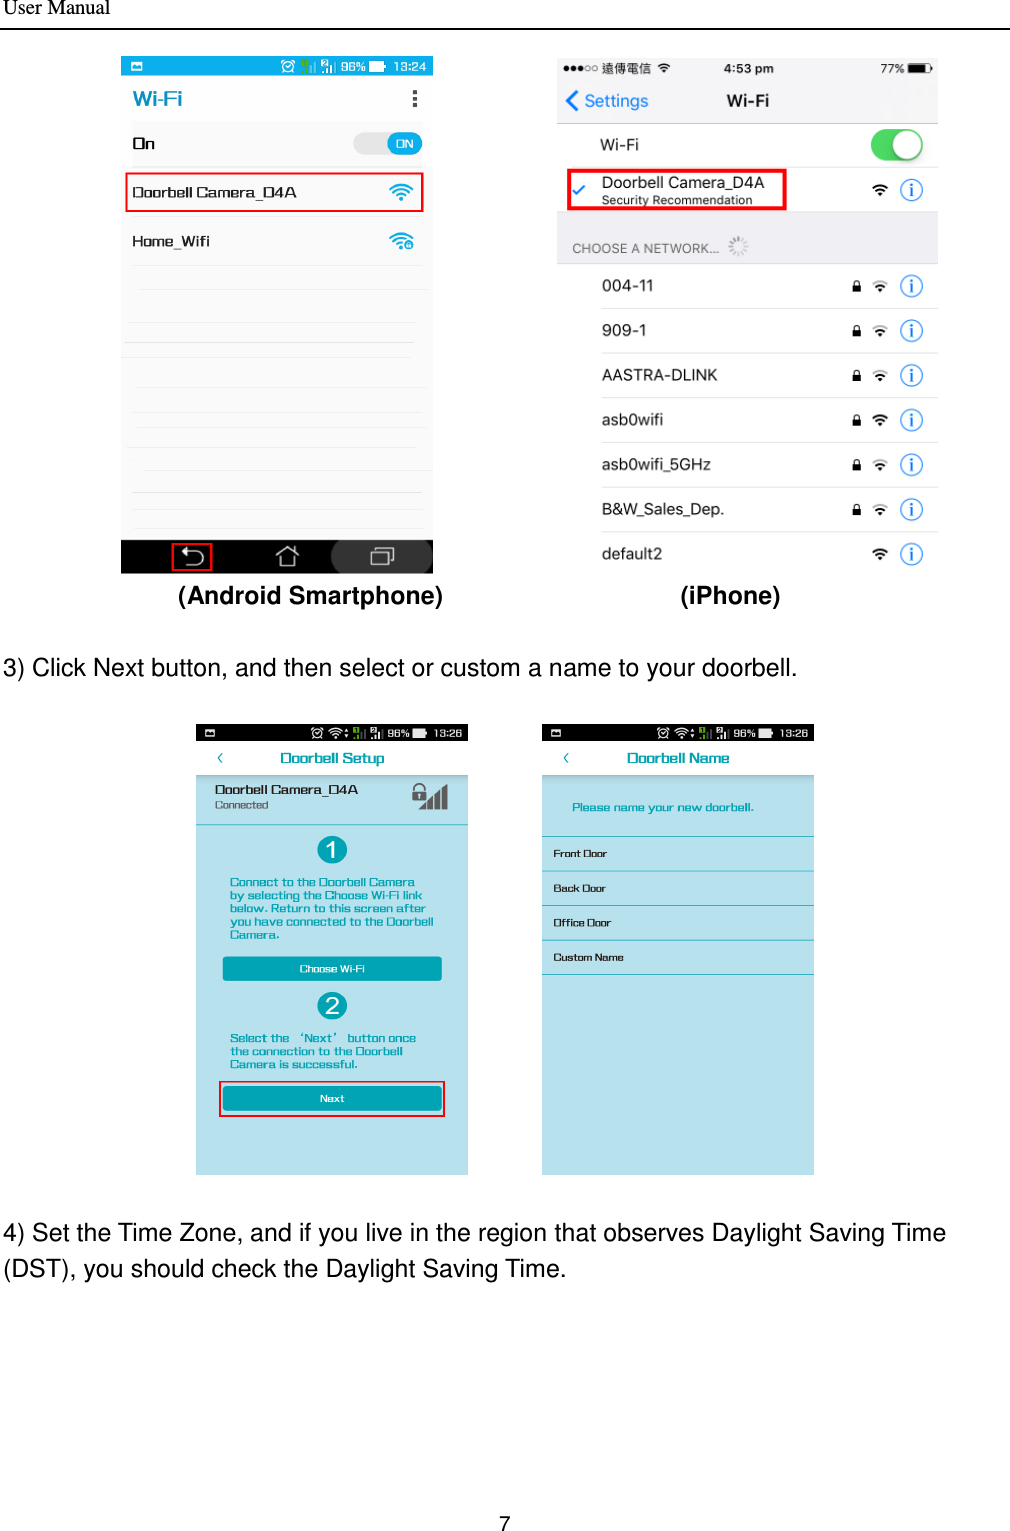 User Manual 7                  (Android Smartphone)                                      (iPhone)  3) Click Next button, and then select or custom a name to your doorbell.           4) Set the Time Zone, and if you live in the region that observes Daylight Saving Time (DST), you should check the Daylight Saving Time. 